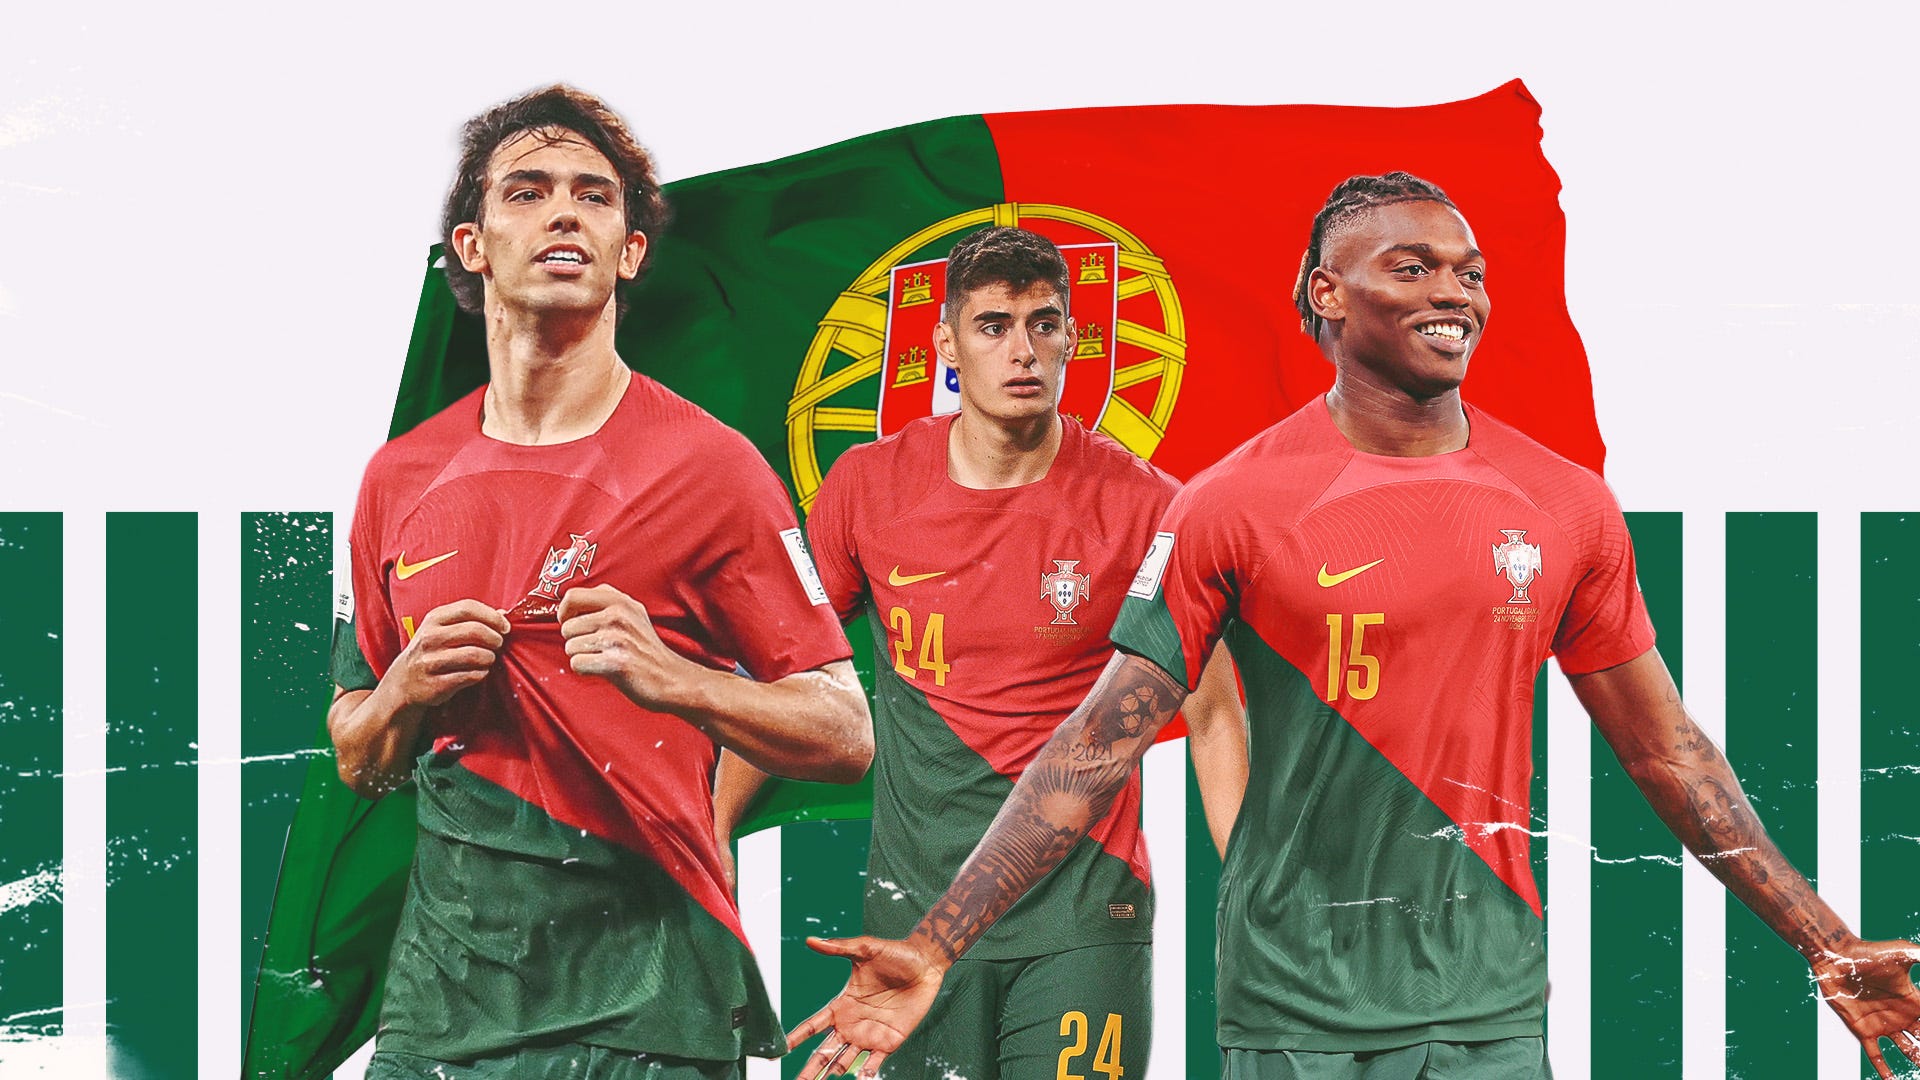 Ronaldo and Bruno Fernandes out, Leao and Ramos in How will Portugal line up at the 2026 World Cup? Goal